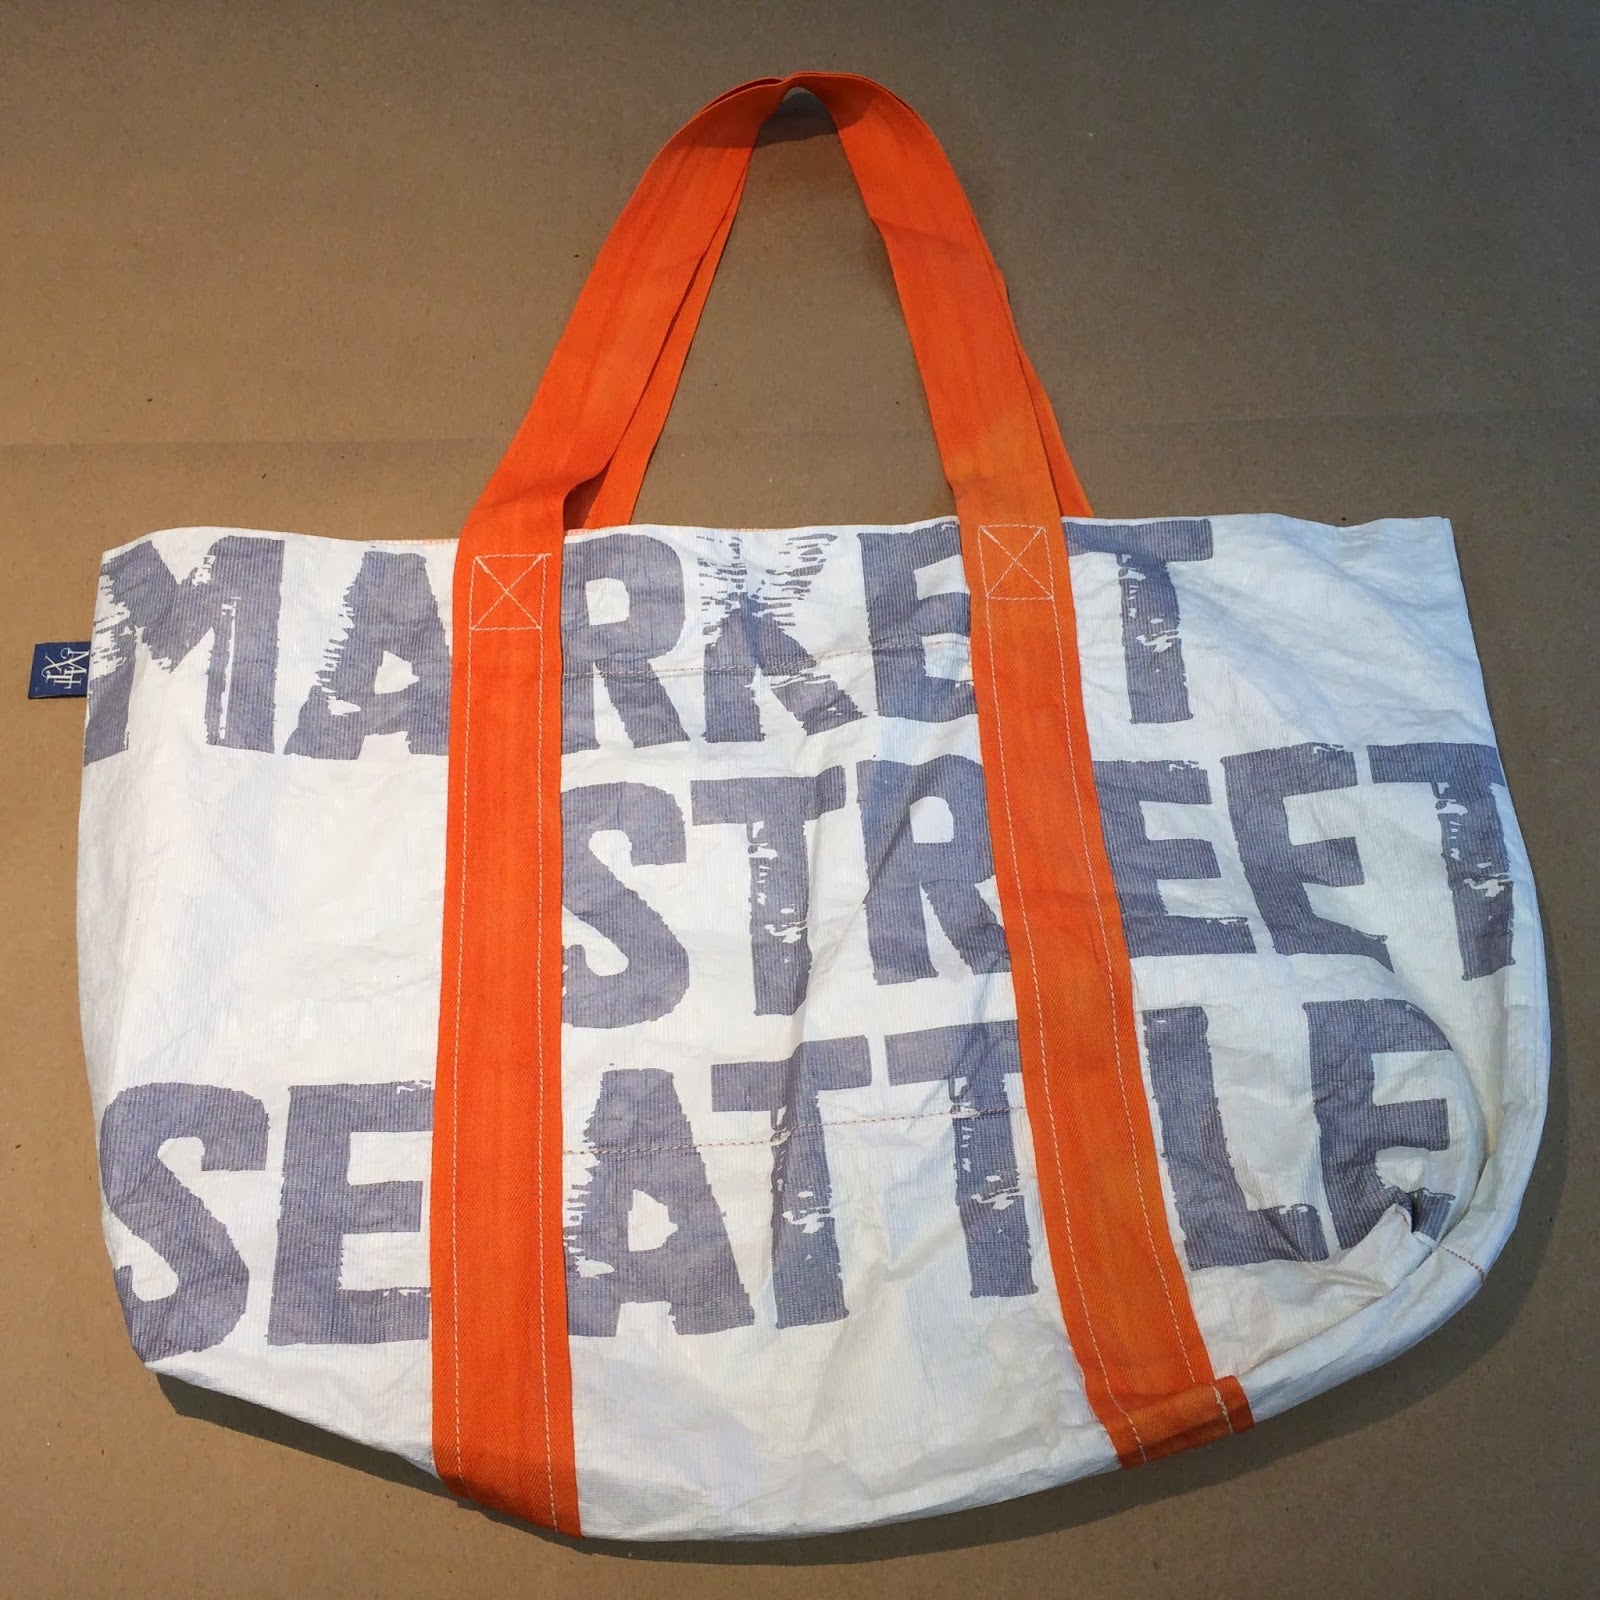 Create durable bags with Tyvek Soft Structure